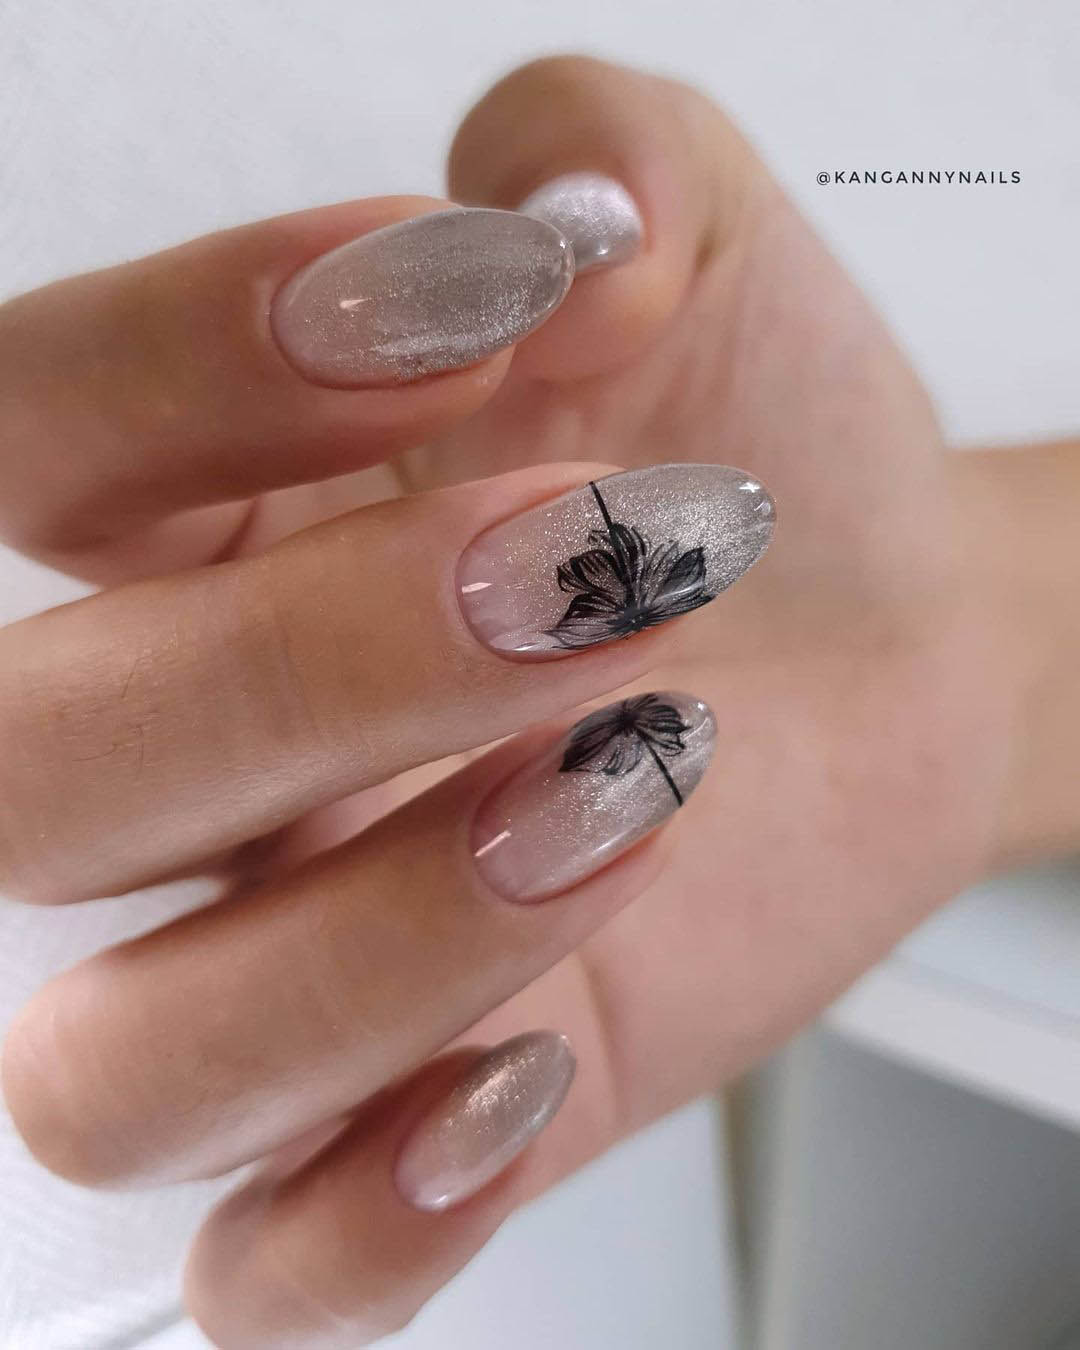 wedding nails with glitter nude with black flowers kangannynails